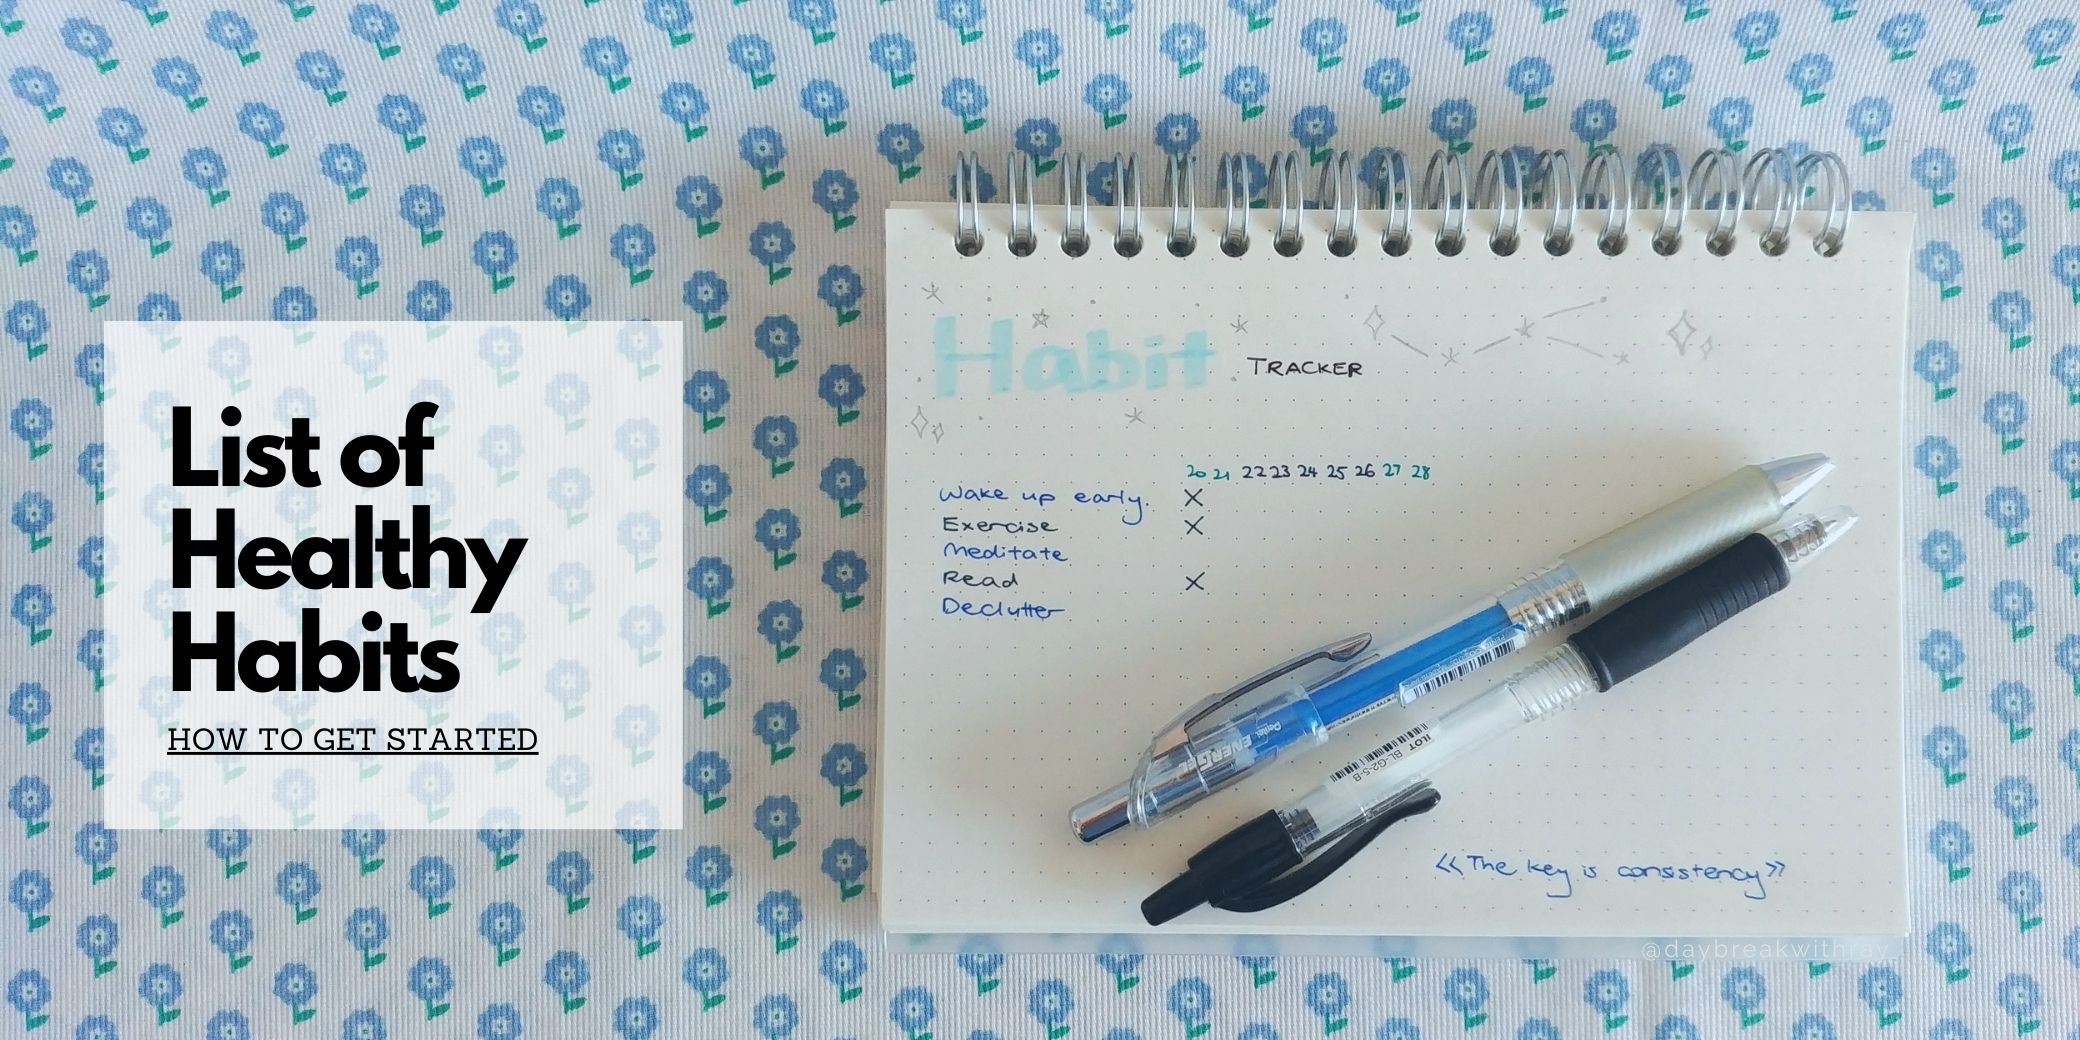 (Featured Image) List of Healthy Habits and How To Get Started